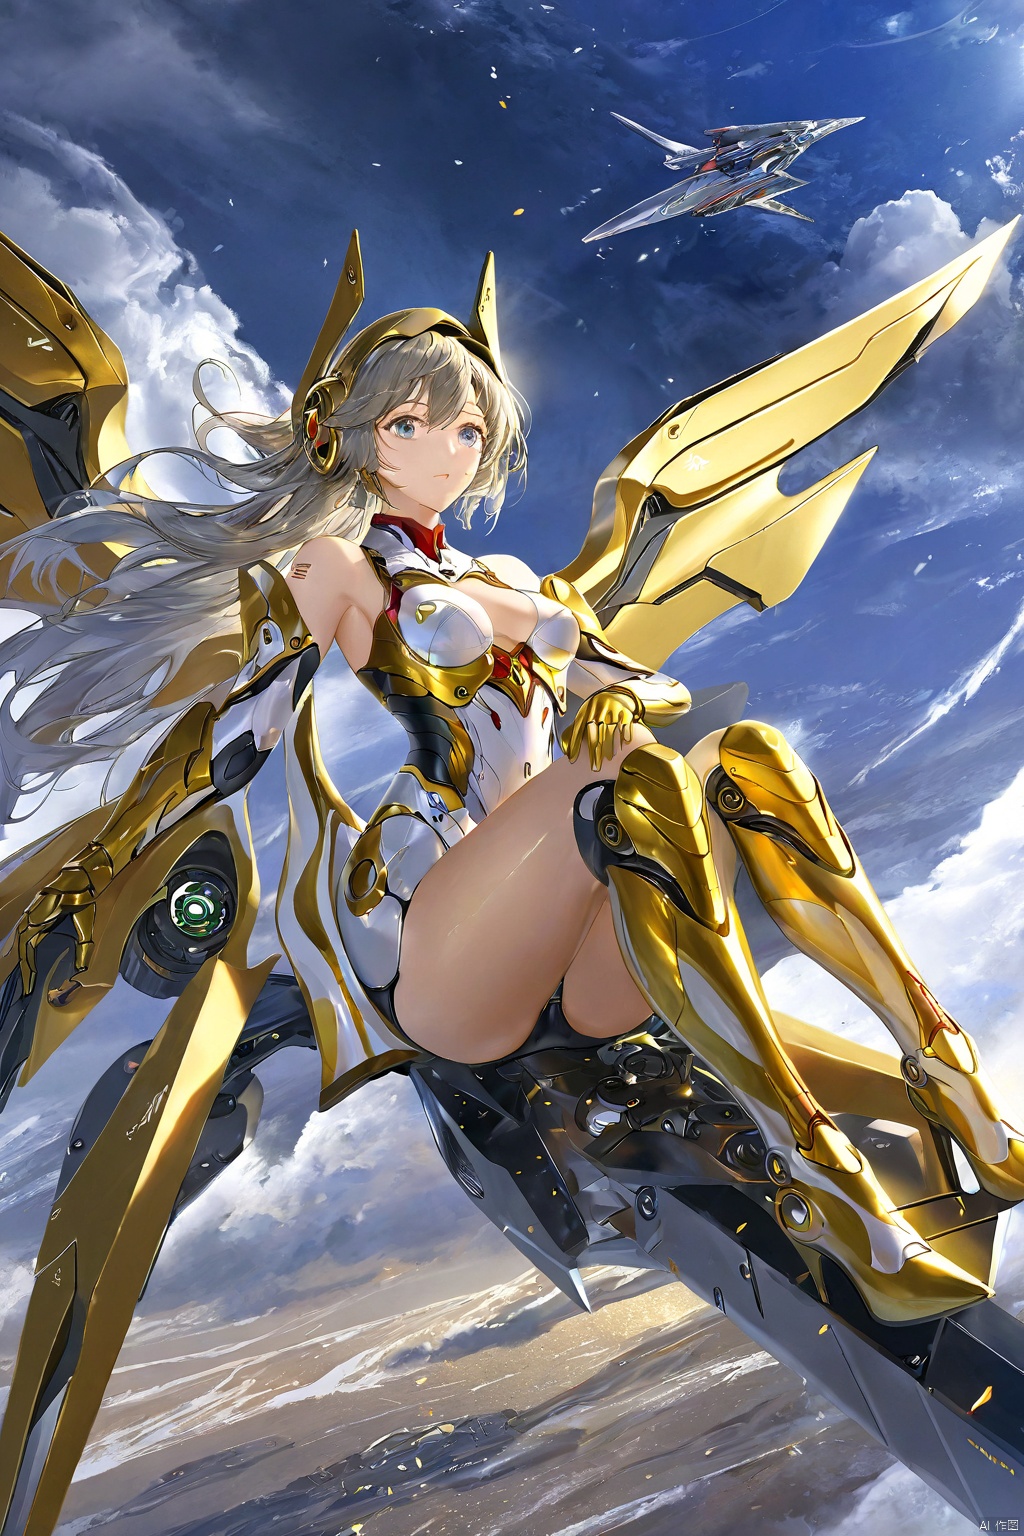  ((masterpiece)), ((best quality)), ((illustration)), extremely detailed,1 girl,gold Gel coat battle suit, ,light grey blud wave_hair, scifi hair ornaments, beautiful detailed deep eyes, beautiful detailed sky, cinematic lighting, wet body,Mechanical wings, thighs open ,Sitting on the wing,EVA